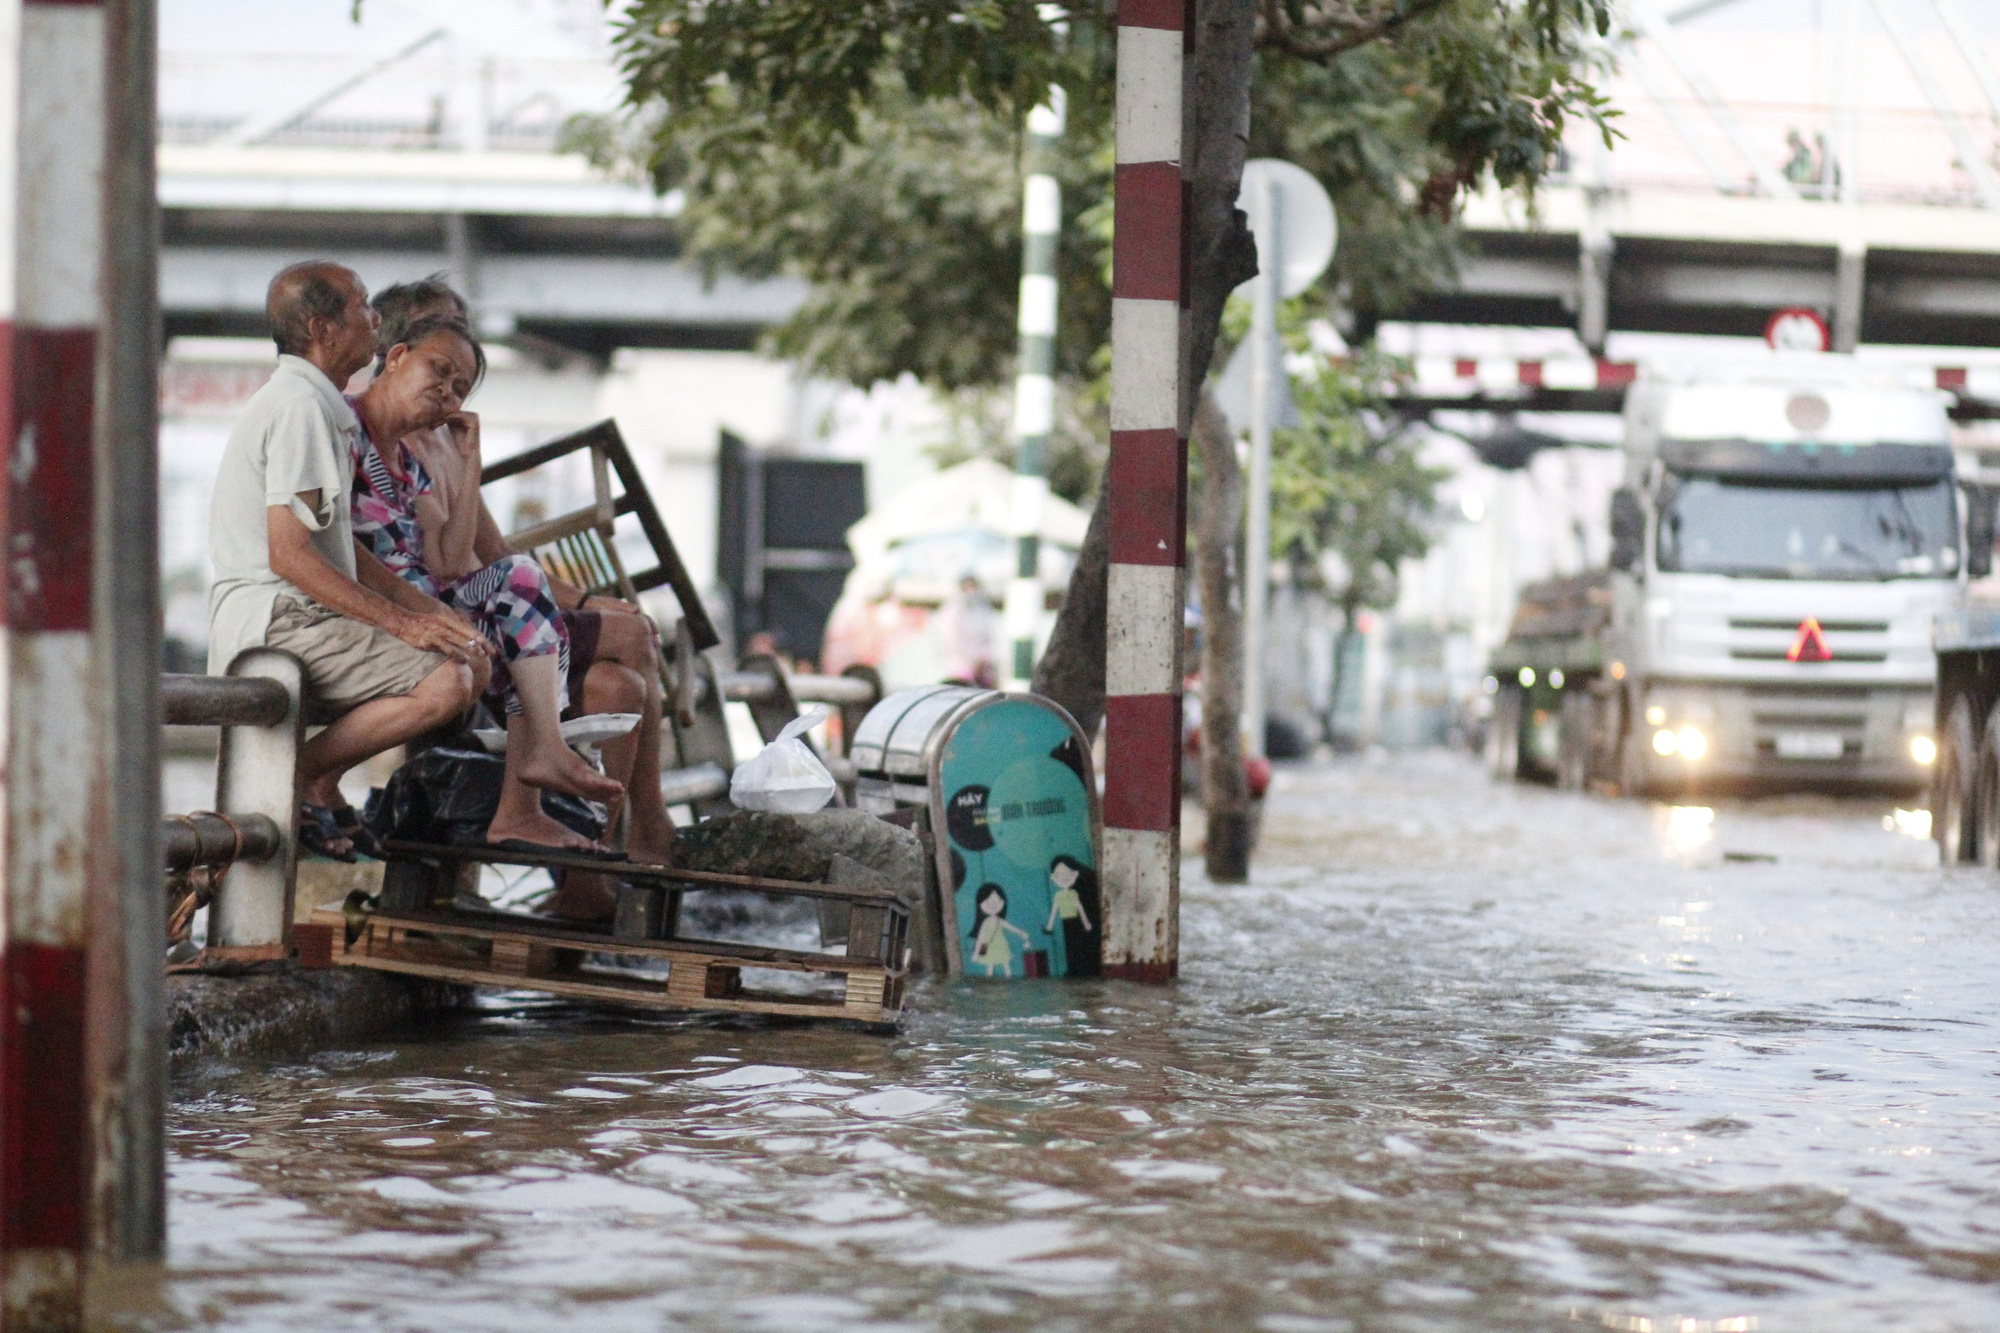 Local residents are pictured on an inundated street in Ho Chi Minh City, November 16, 2020. Photo: Chau Tuan / Tuoi Tre